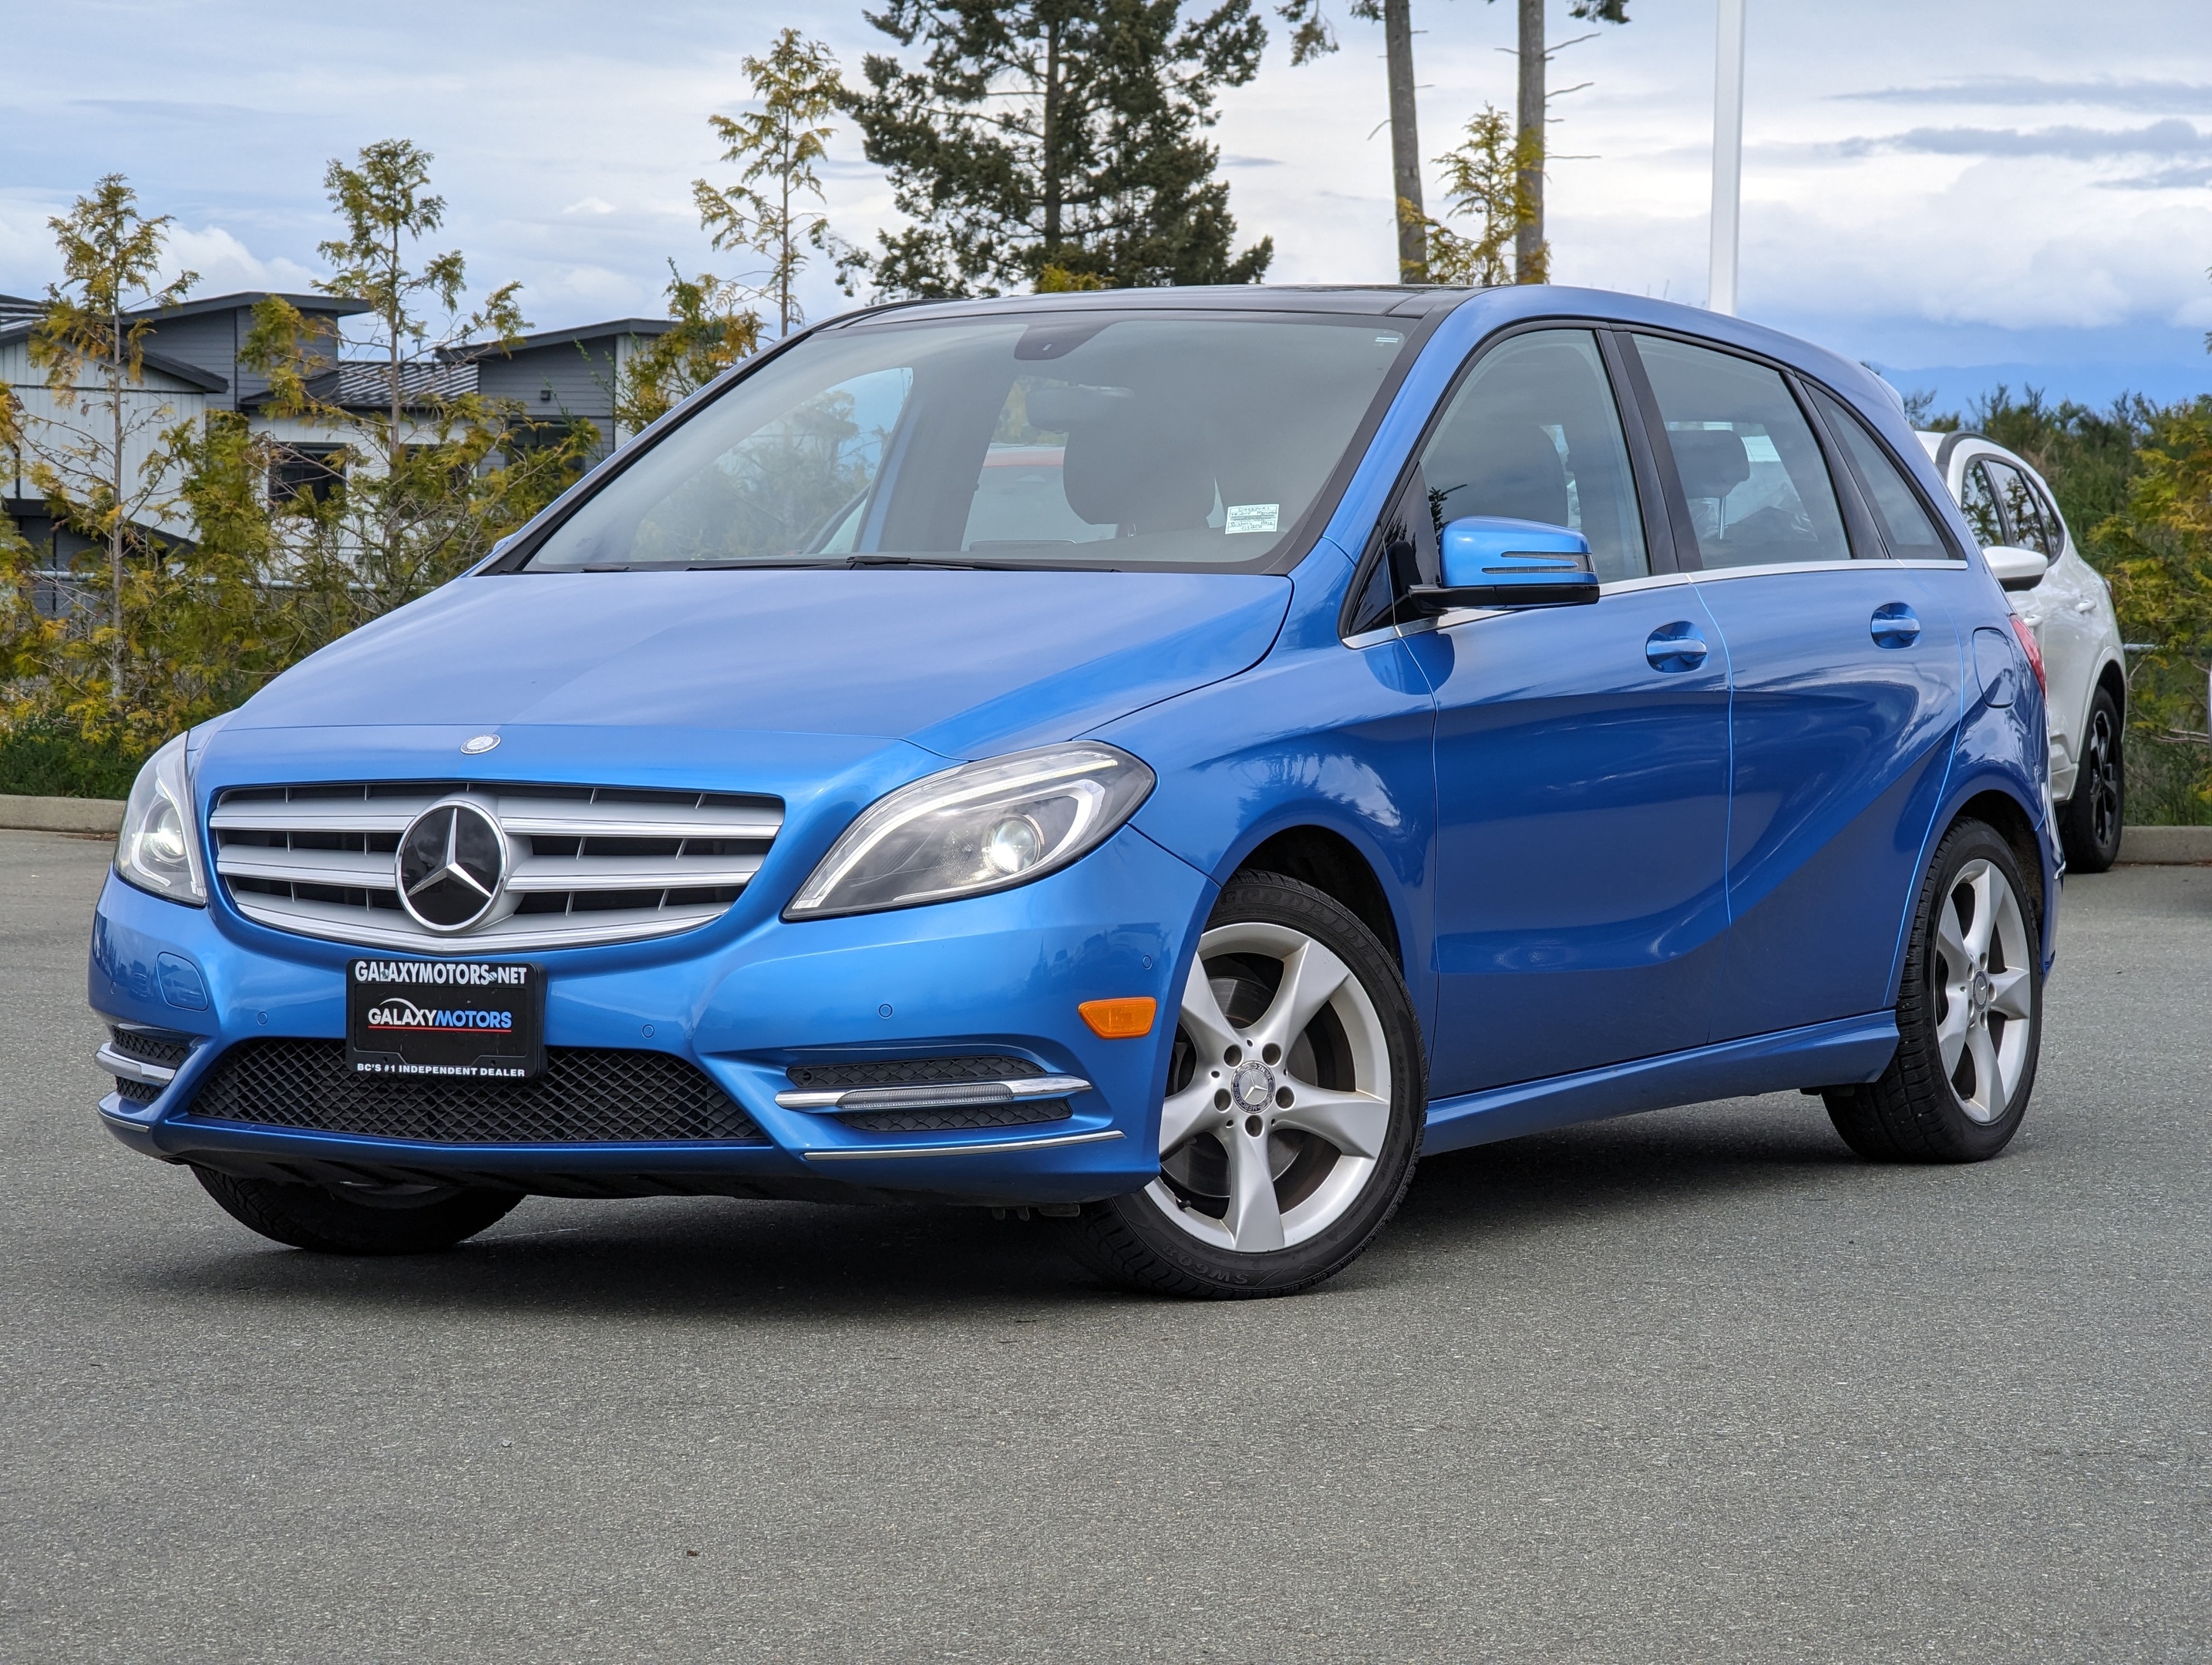 2014 Mercedes-Benz B-Class Sports Tourer - Sunroof, Leather, Heated Seats 